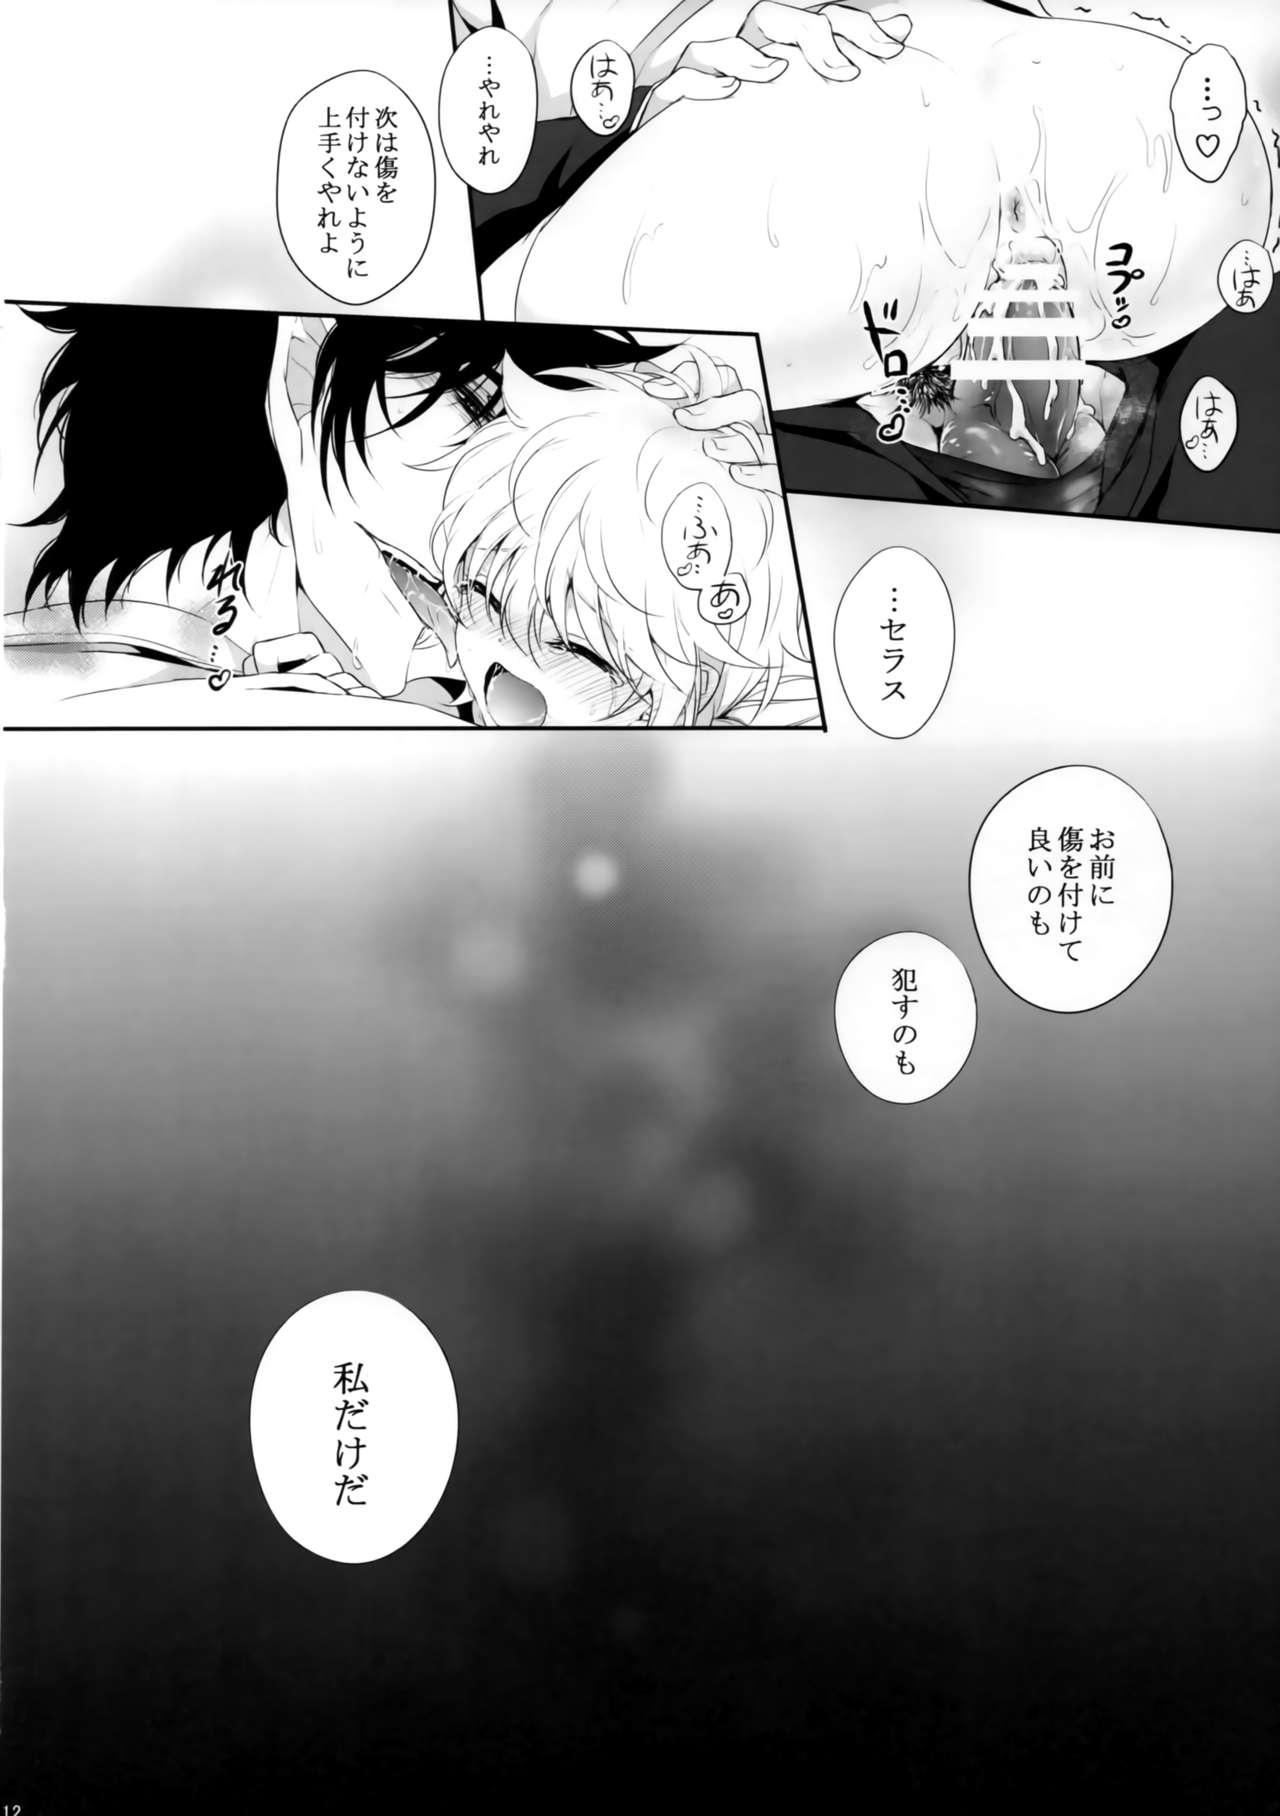 Short Exclusive Treatment - Hellsing Pregnant - Page 11